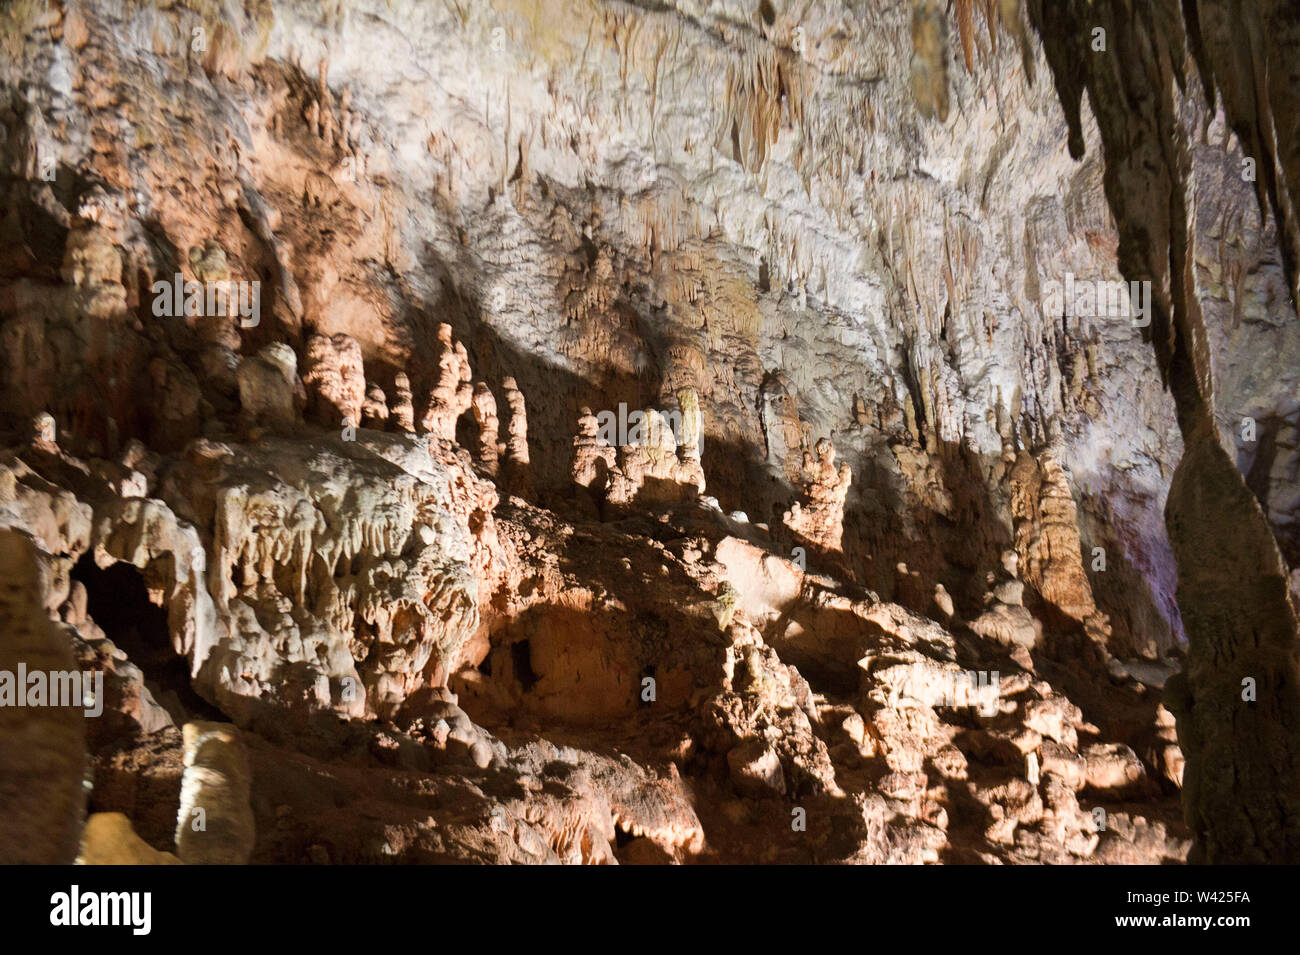 Europe, Italy, Campania, Caves of Pertosa - Auletta. Under the Alburni mountain runs the Negro river in the caves allowing navigation Stock Photo